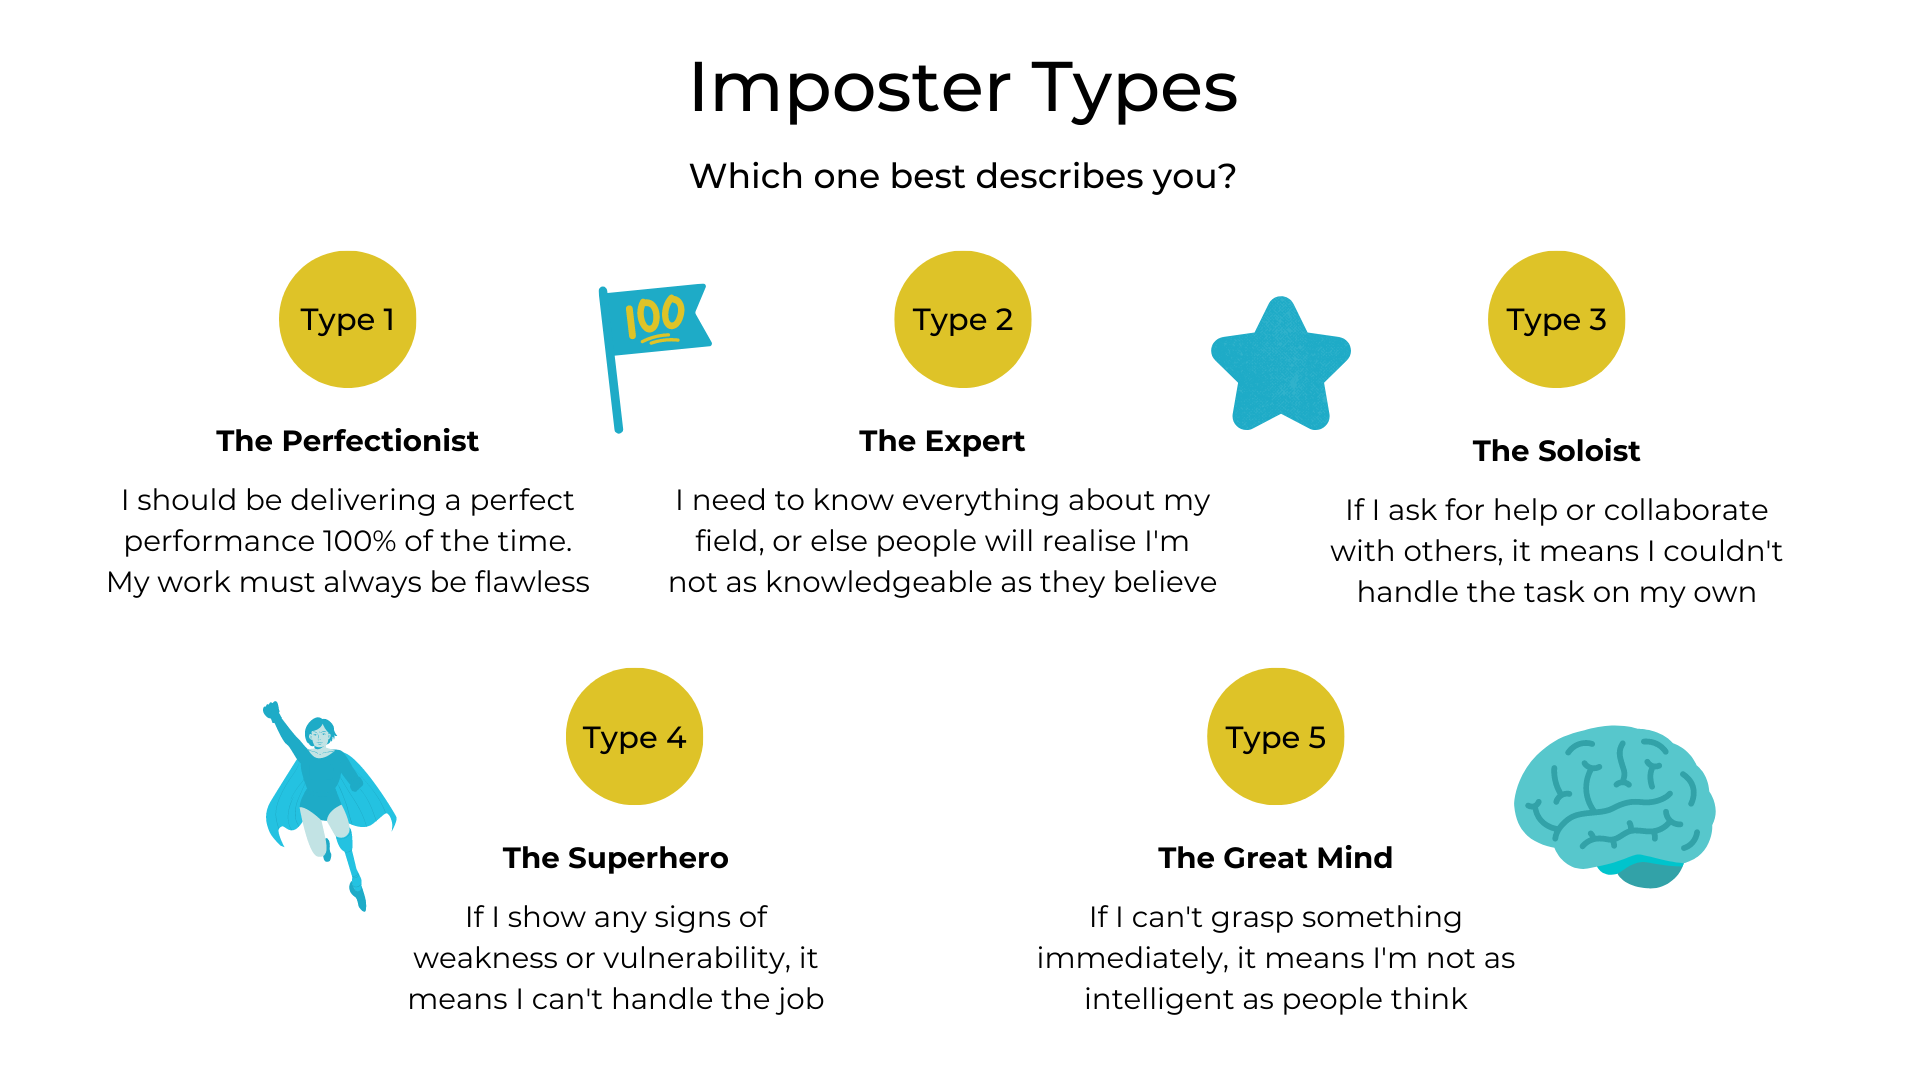 Imposter types